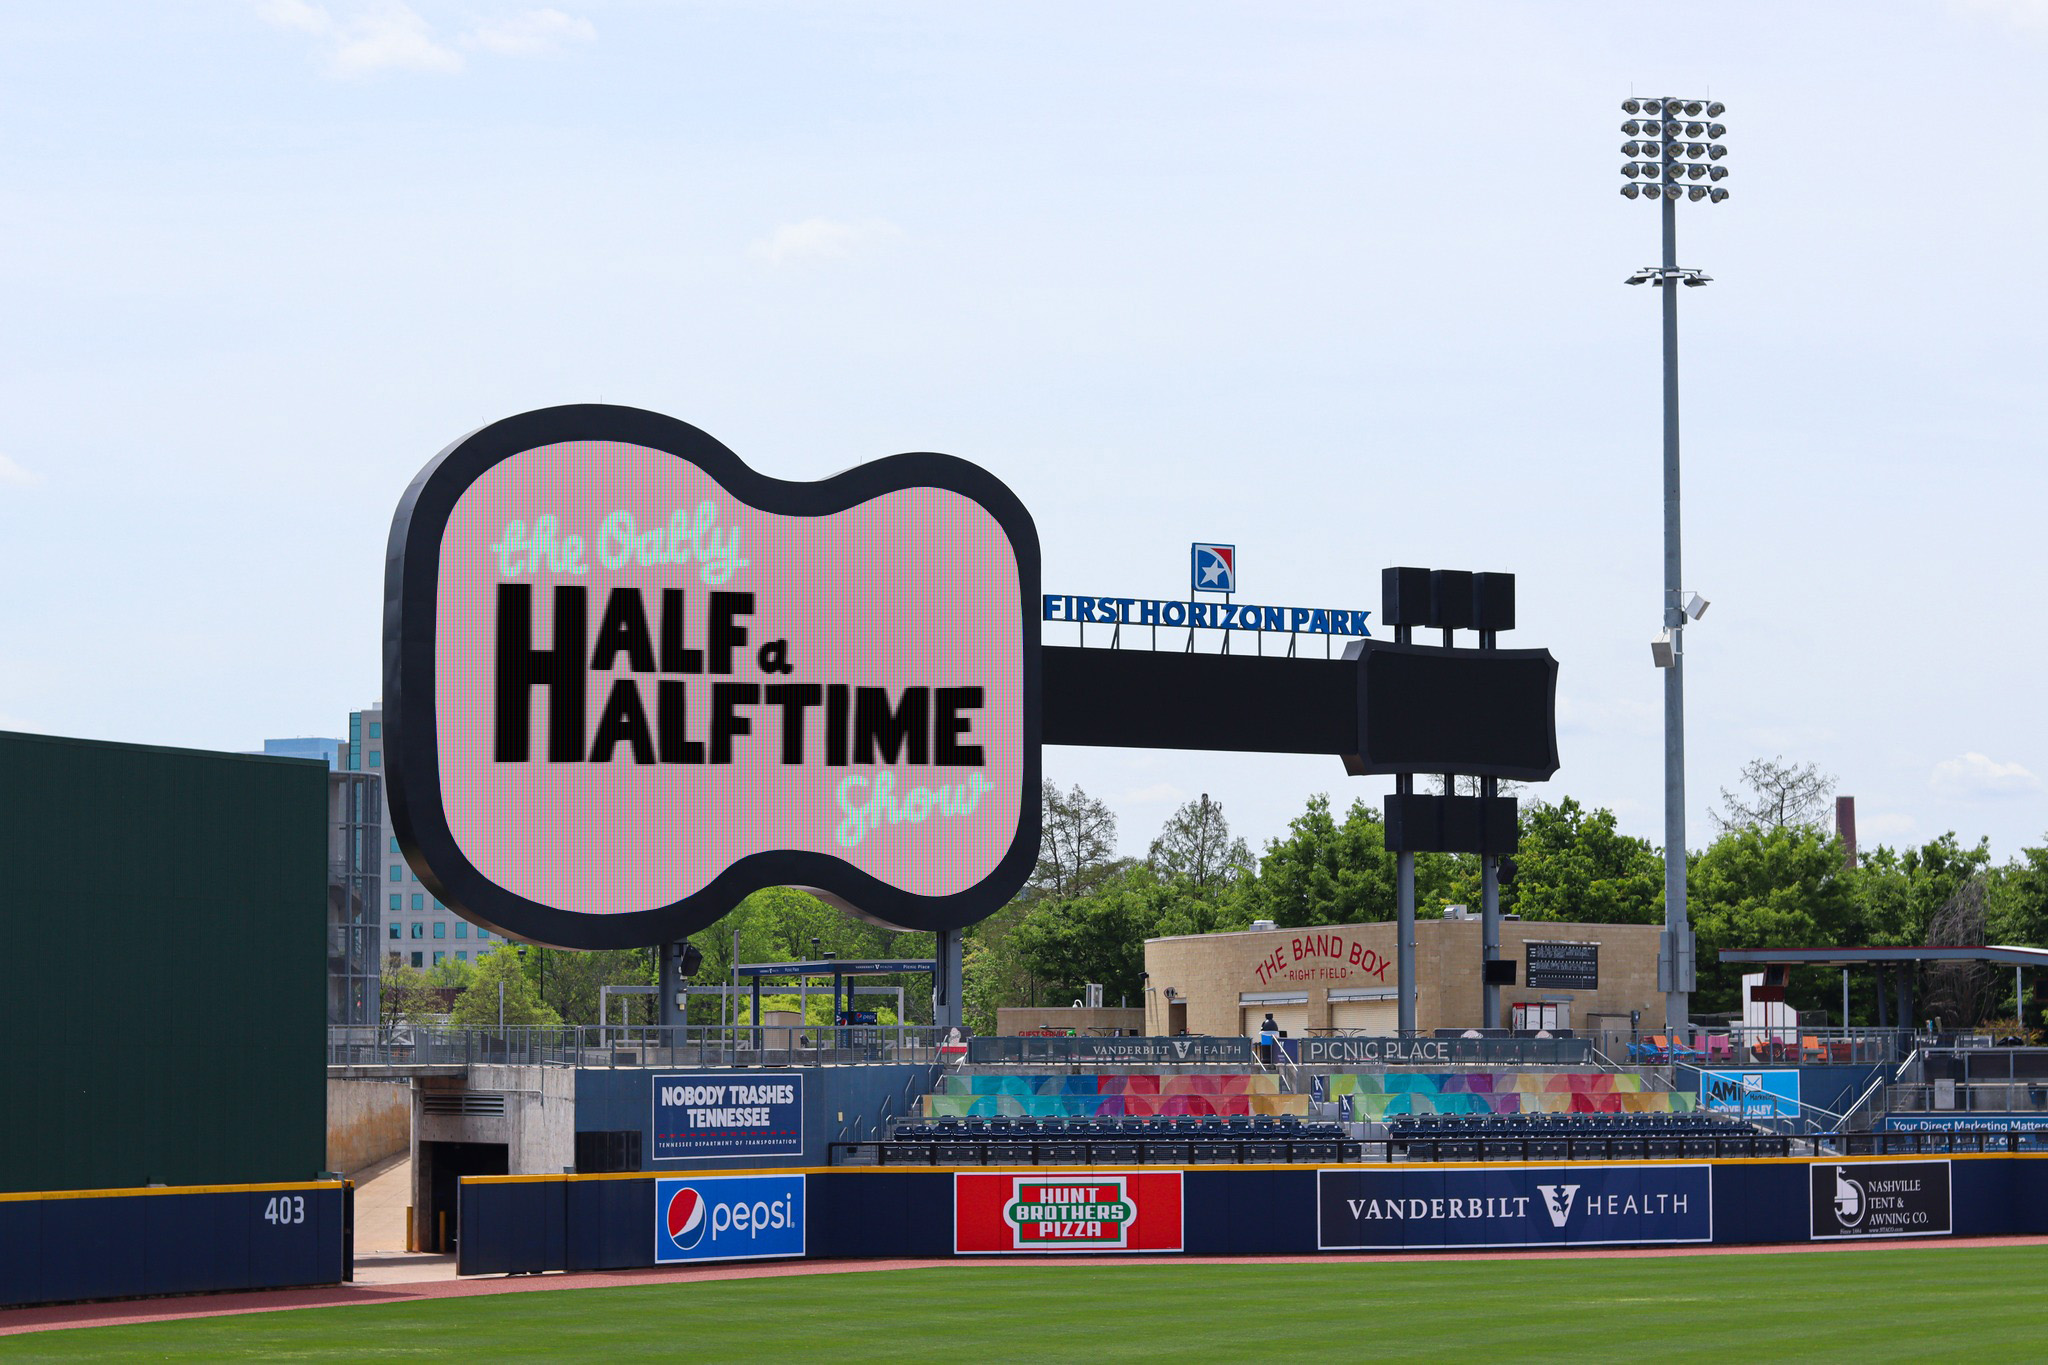 Halftime show at MiLB game